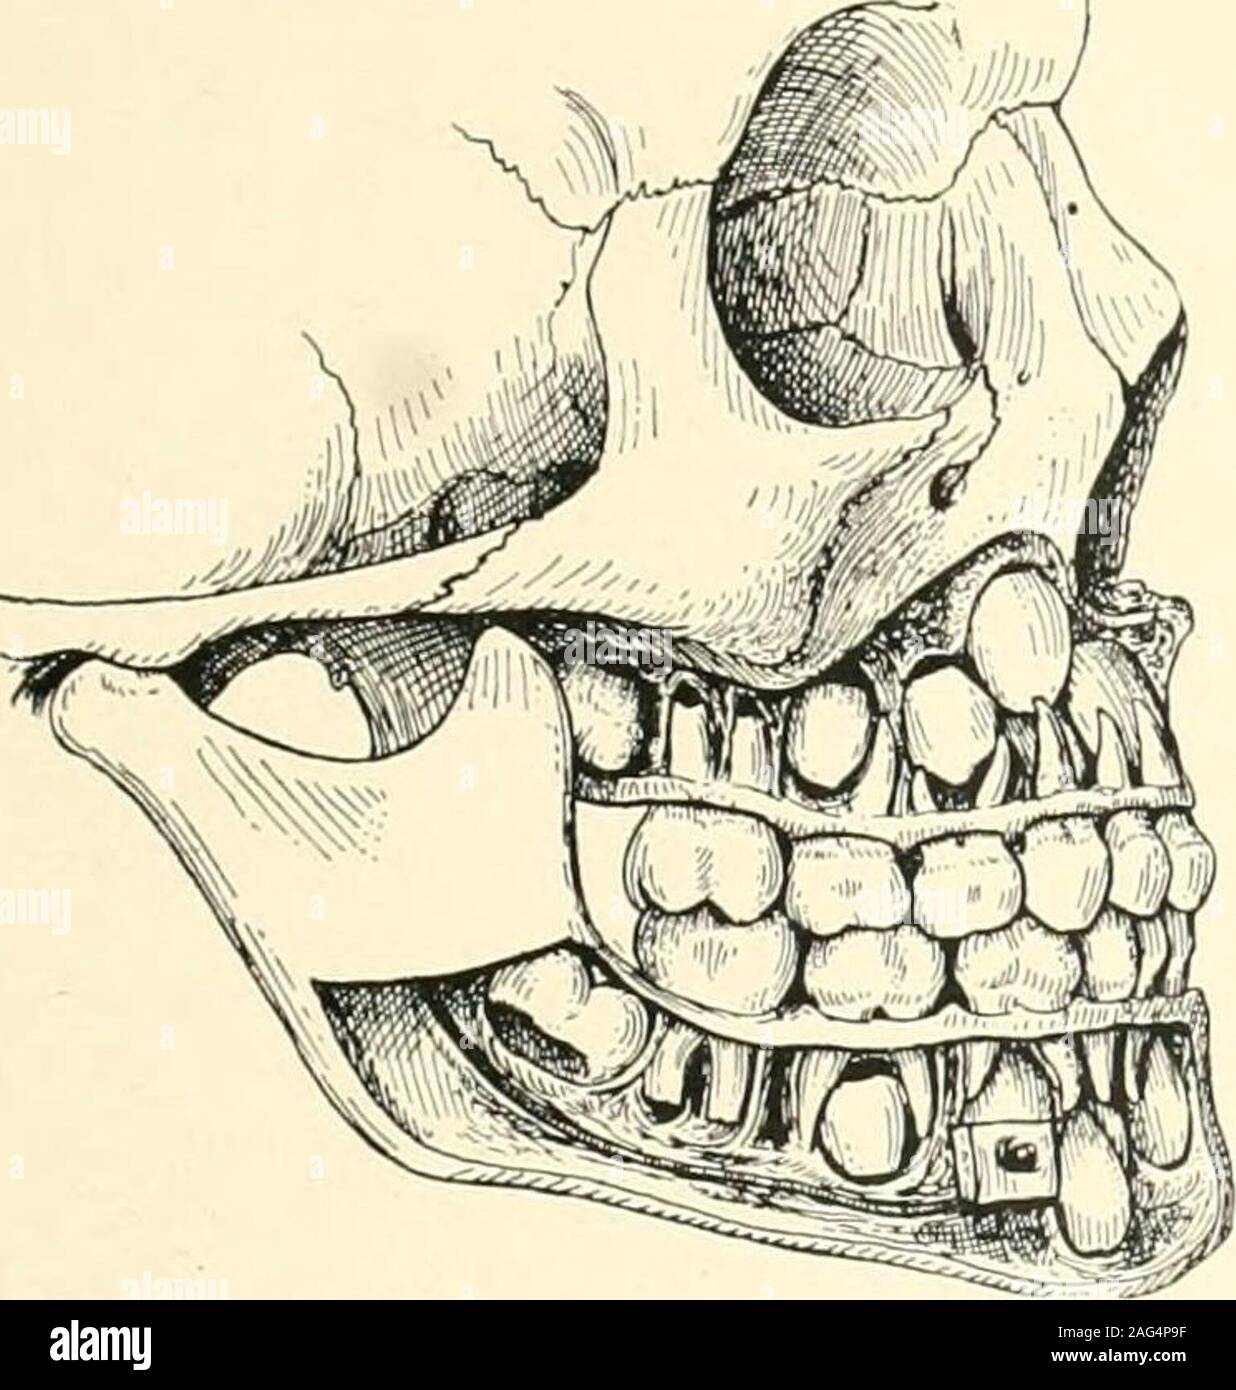 . The science and practice of dental surgery. r plate has been removed to showthe extent of calcification of the permanent teeth.(Odontological Museum, Royal College of Surgeonsof England.) traced at this period in the roots of the deciduousincisors. The crypts of the first permanentmolars are widely open and their contained 27 teeth have become partly extruded through,the overlying gum alone remaining intact. Thecrowns of the incisors are complete, excepttowards the cervical margin, where the enamelmay present the dull, lustreless, appearance indi-cative of incomplete calcification (see Figs. Stock Photo